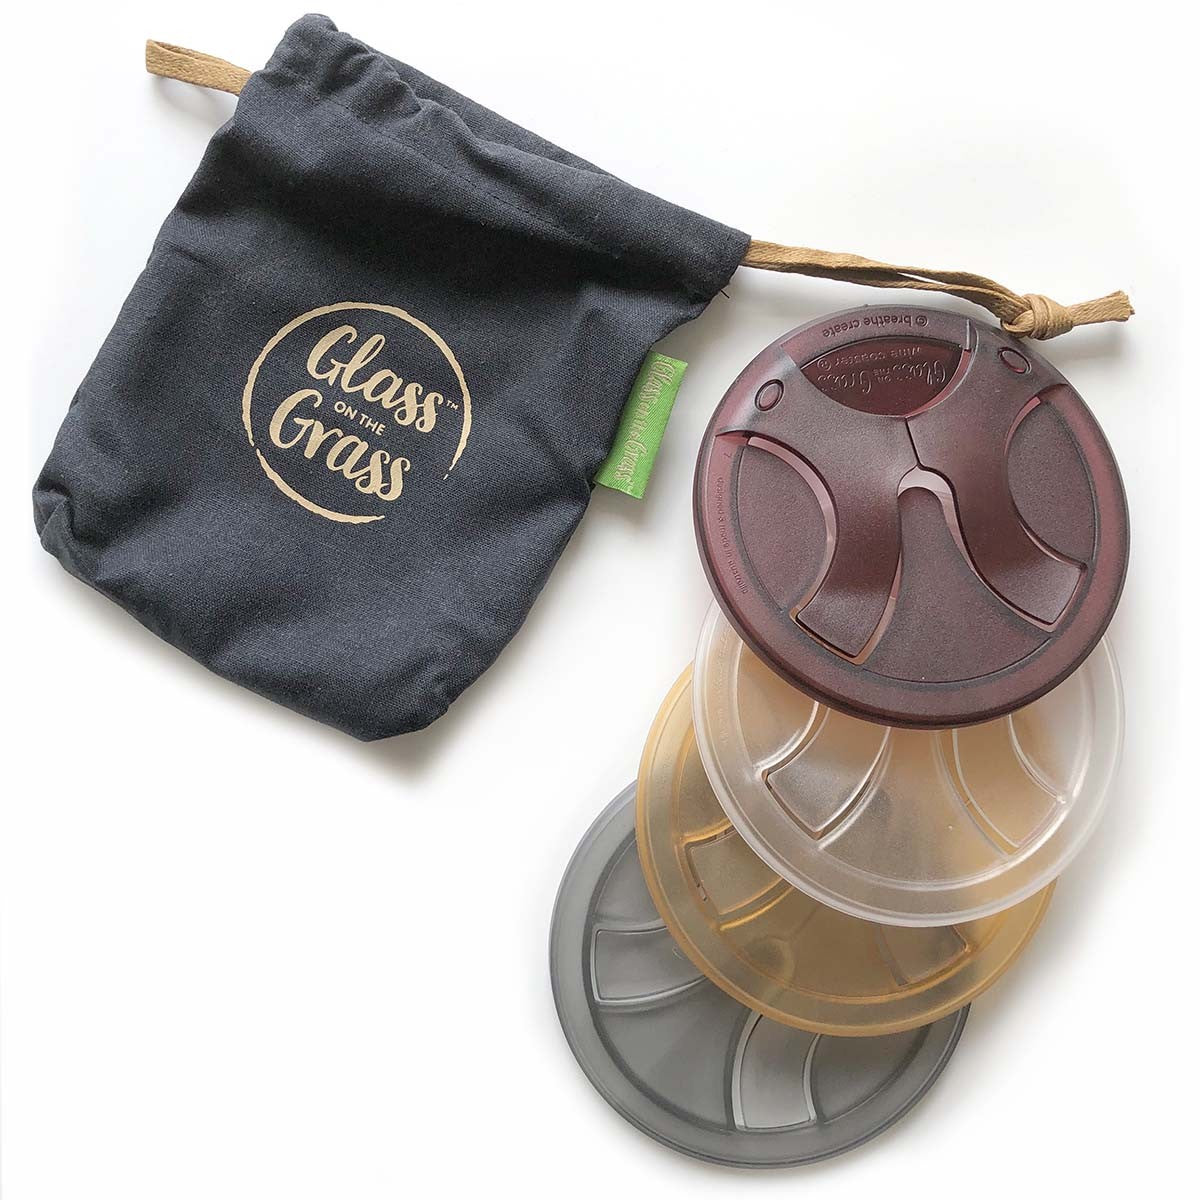 Glass On The Grass Wine Coasters - Gentleman's Collection